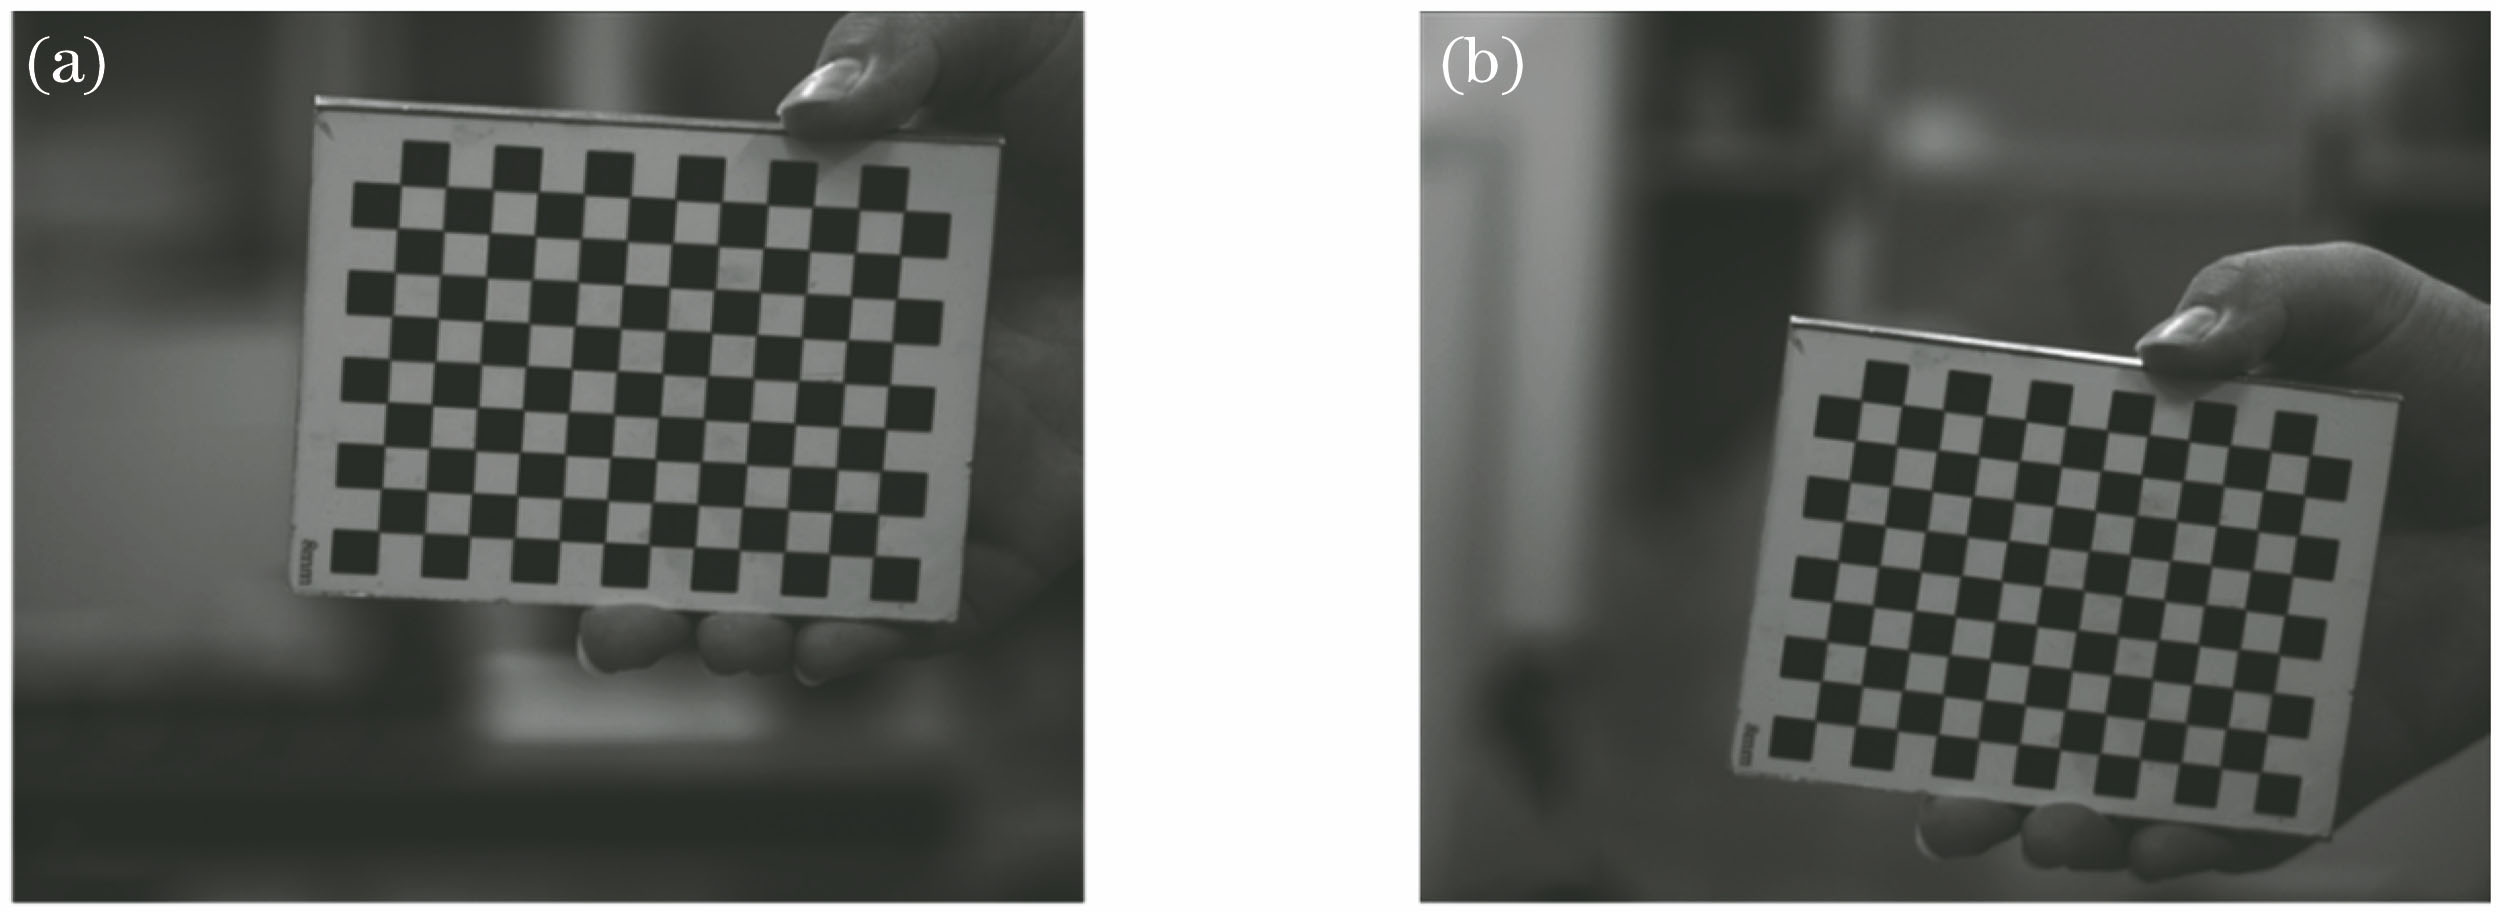 Chessboard images of different cameras. (a) Camera C0; (b) camera C1